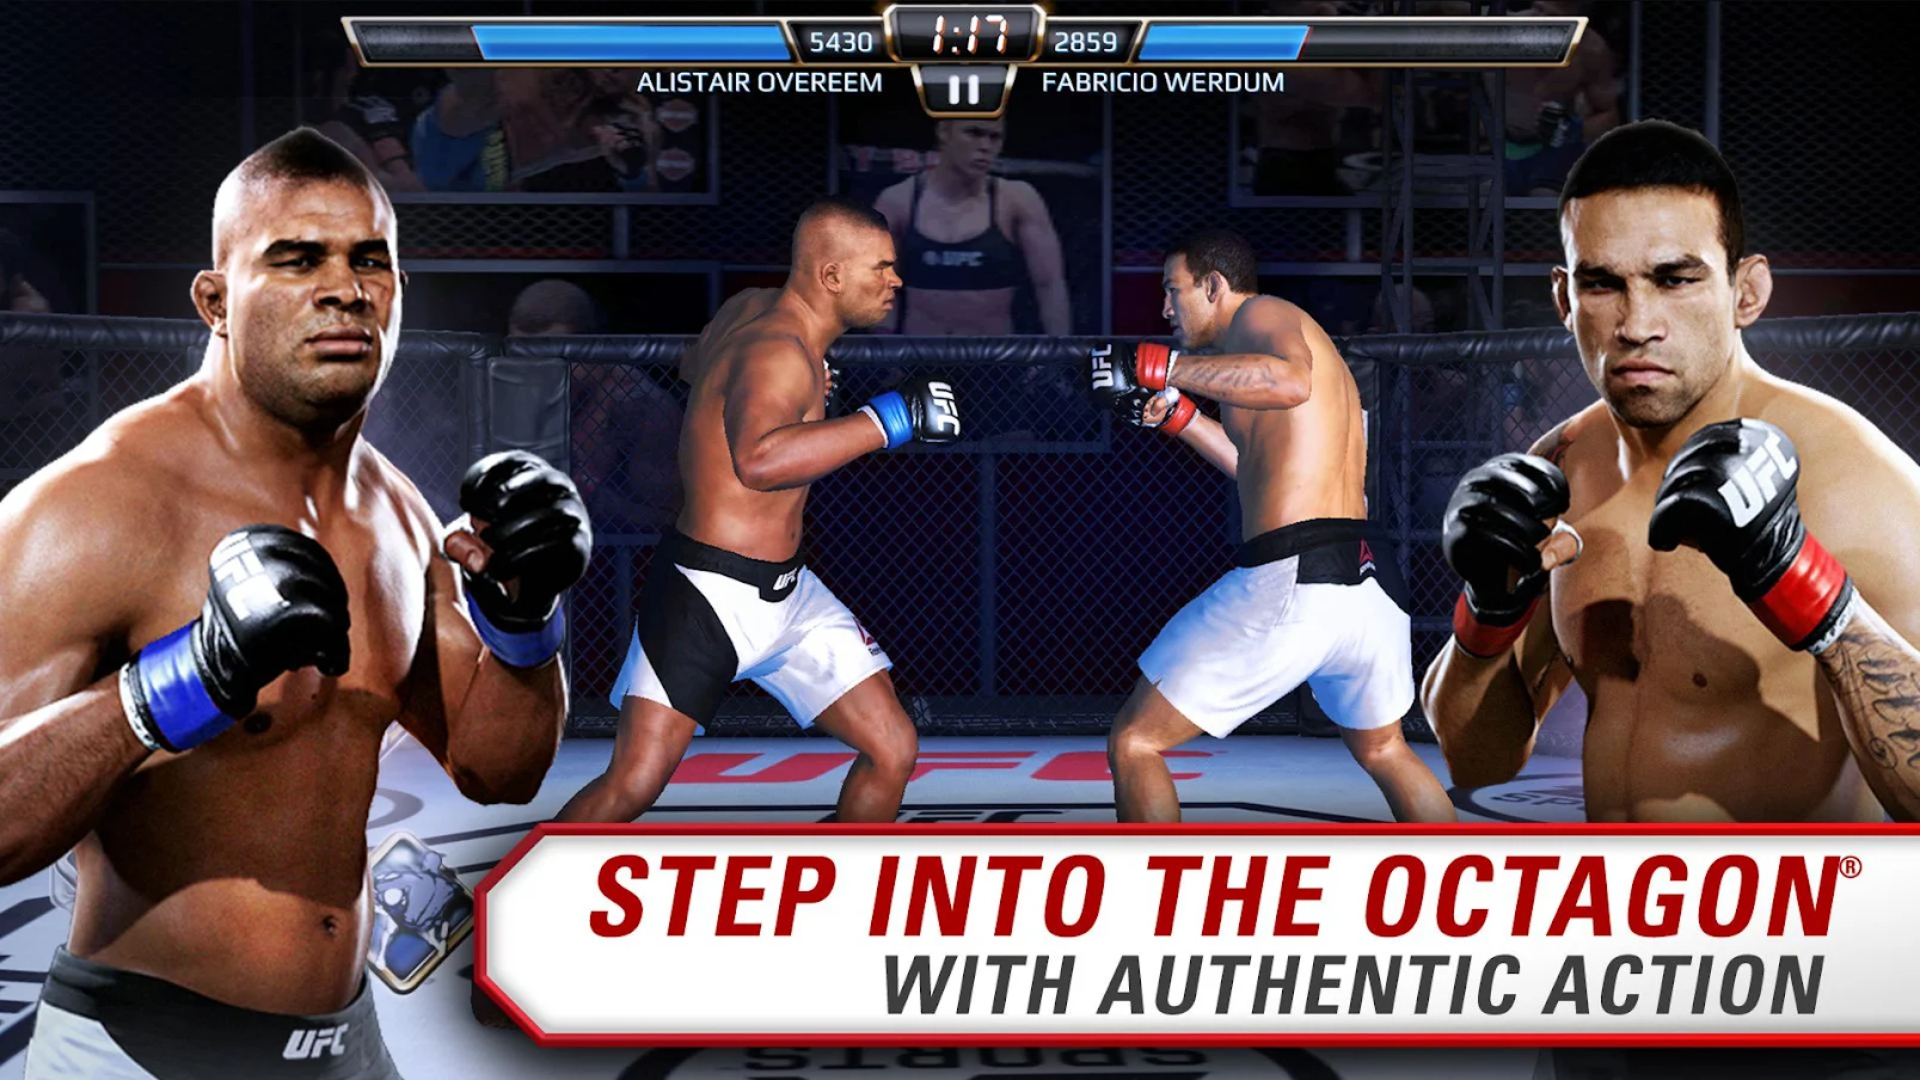 Best mobile sports games: EA Sports UFC. Image shows two boxers in the ring, with text reading "Step into the octagon with authentic action."